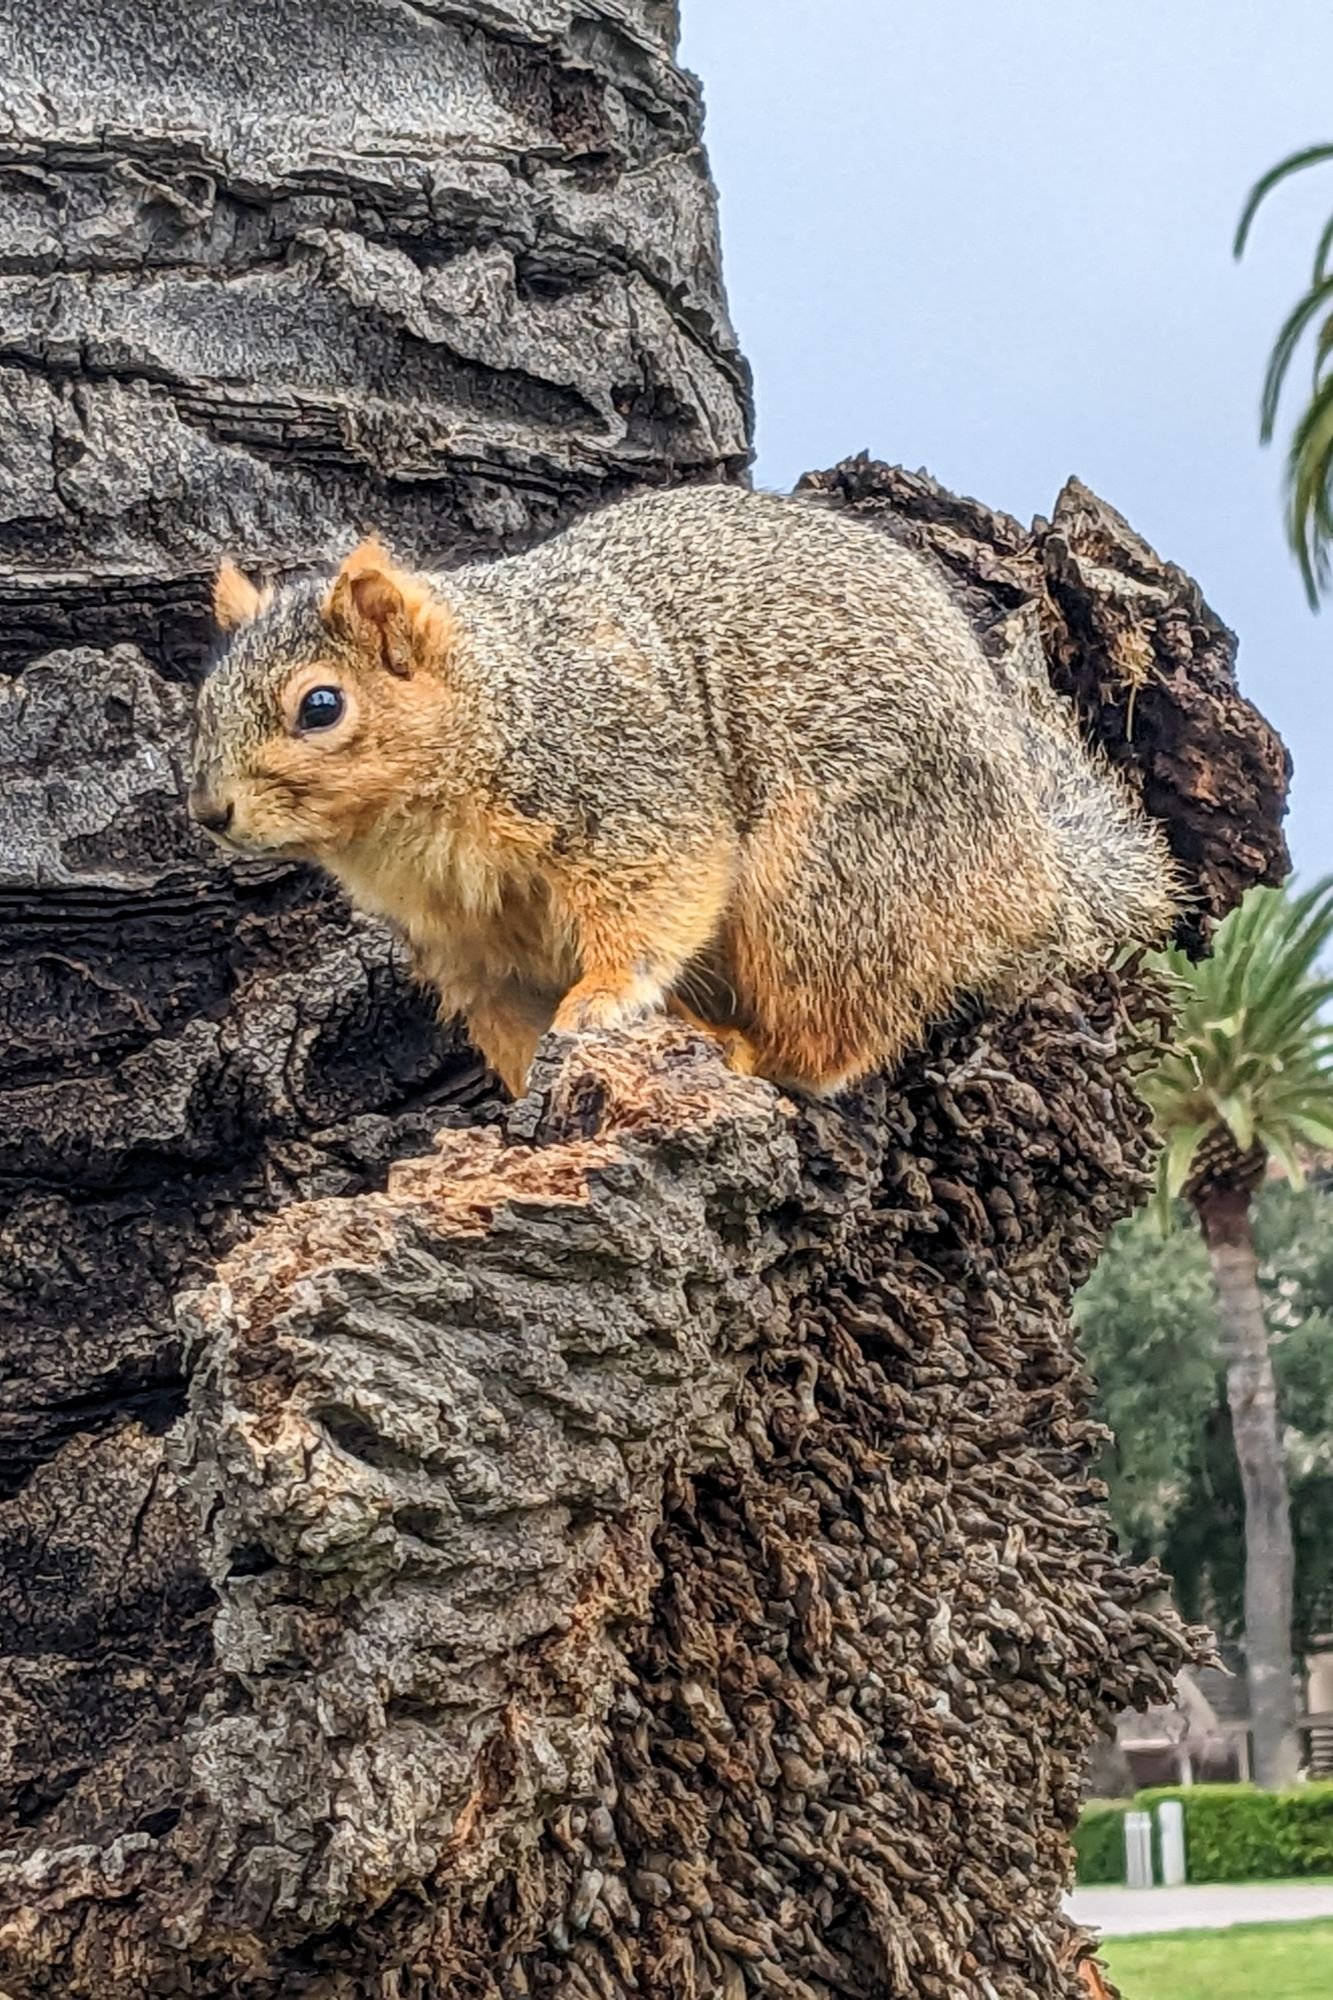 A brown and tan squirrel sits on the base of a palm tree.